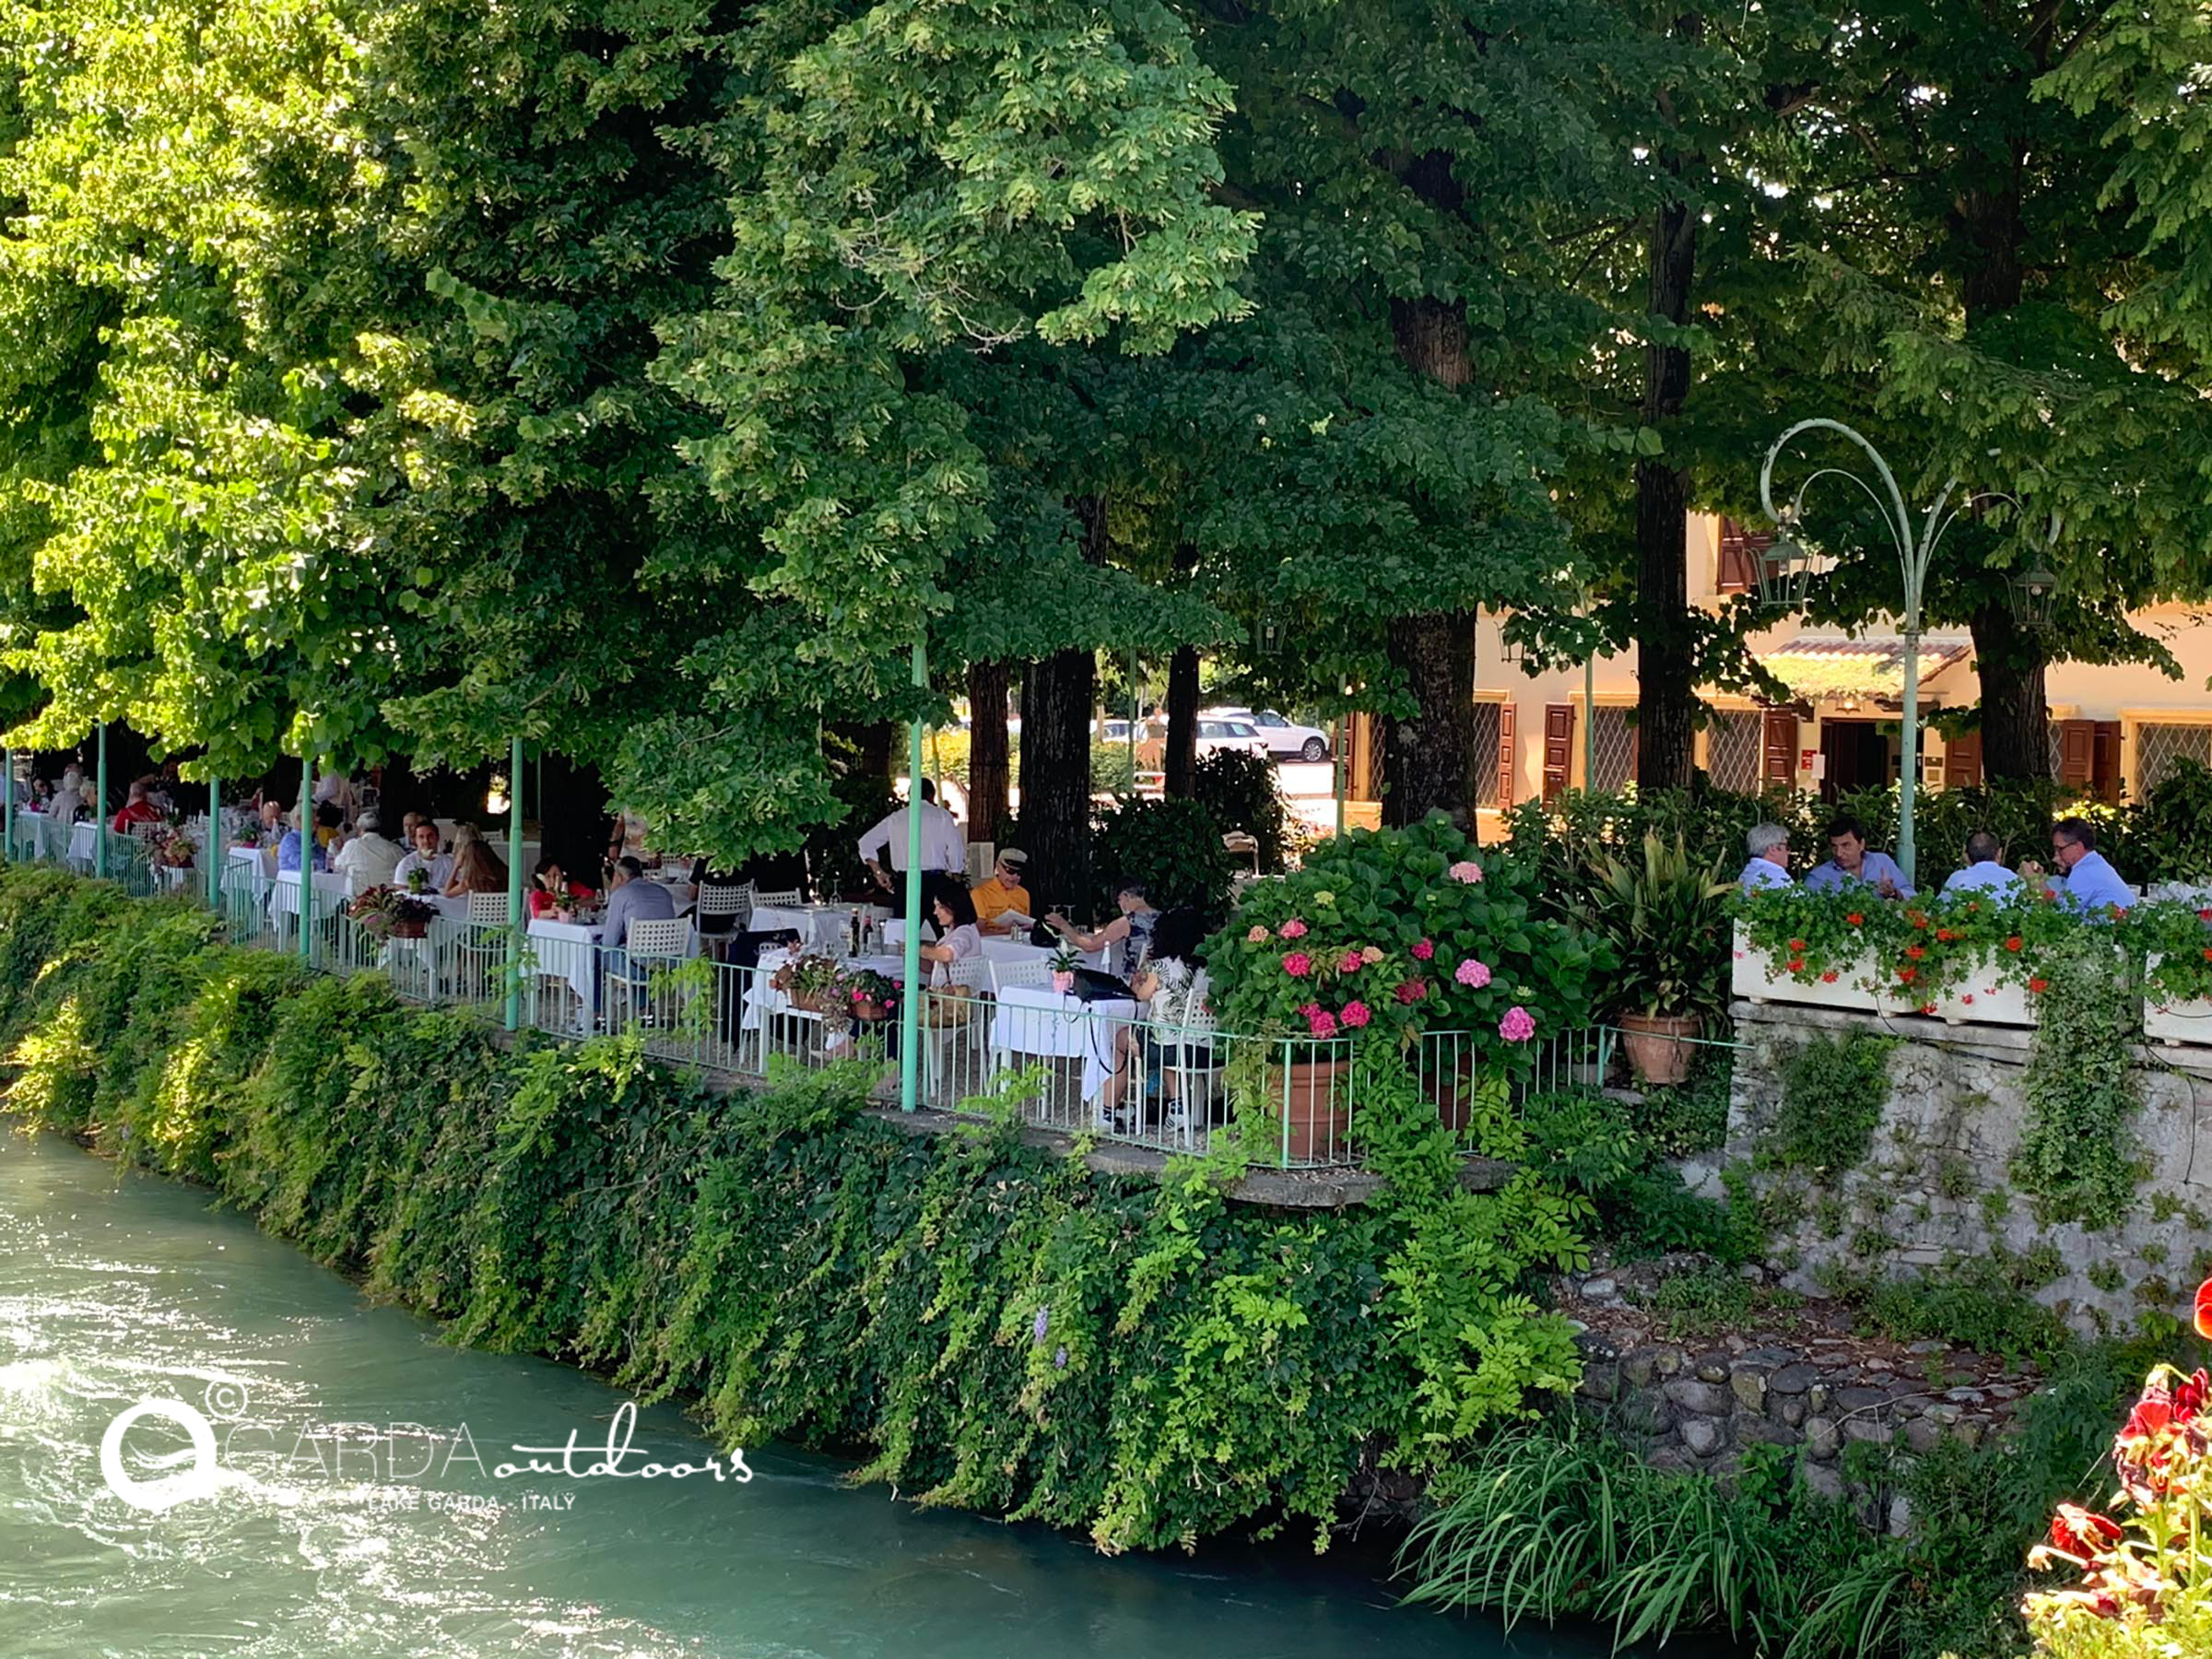 Borghetto sul Mincio, elected among the "most beautiful Villages in Italy". 